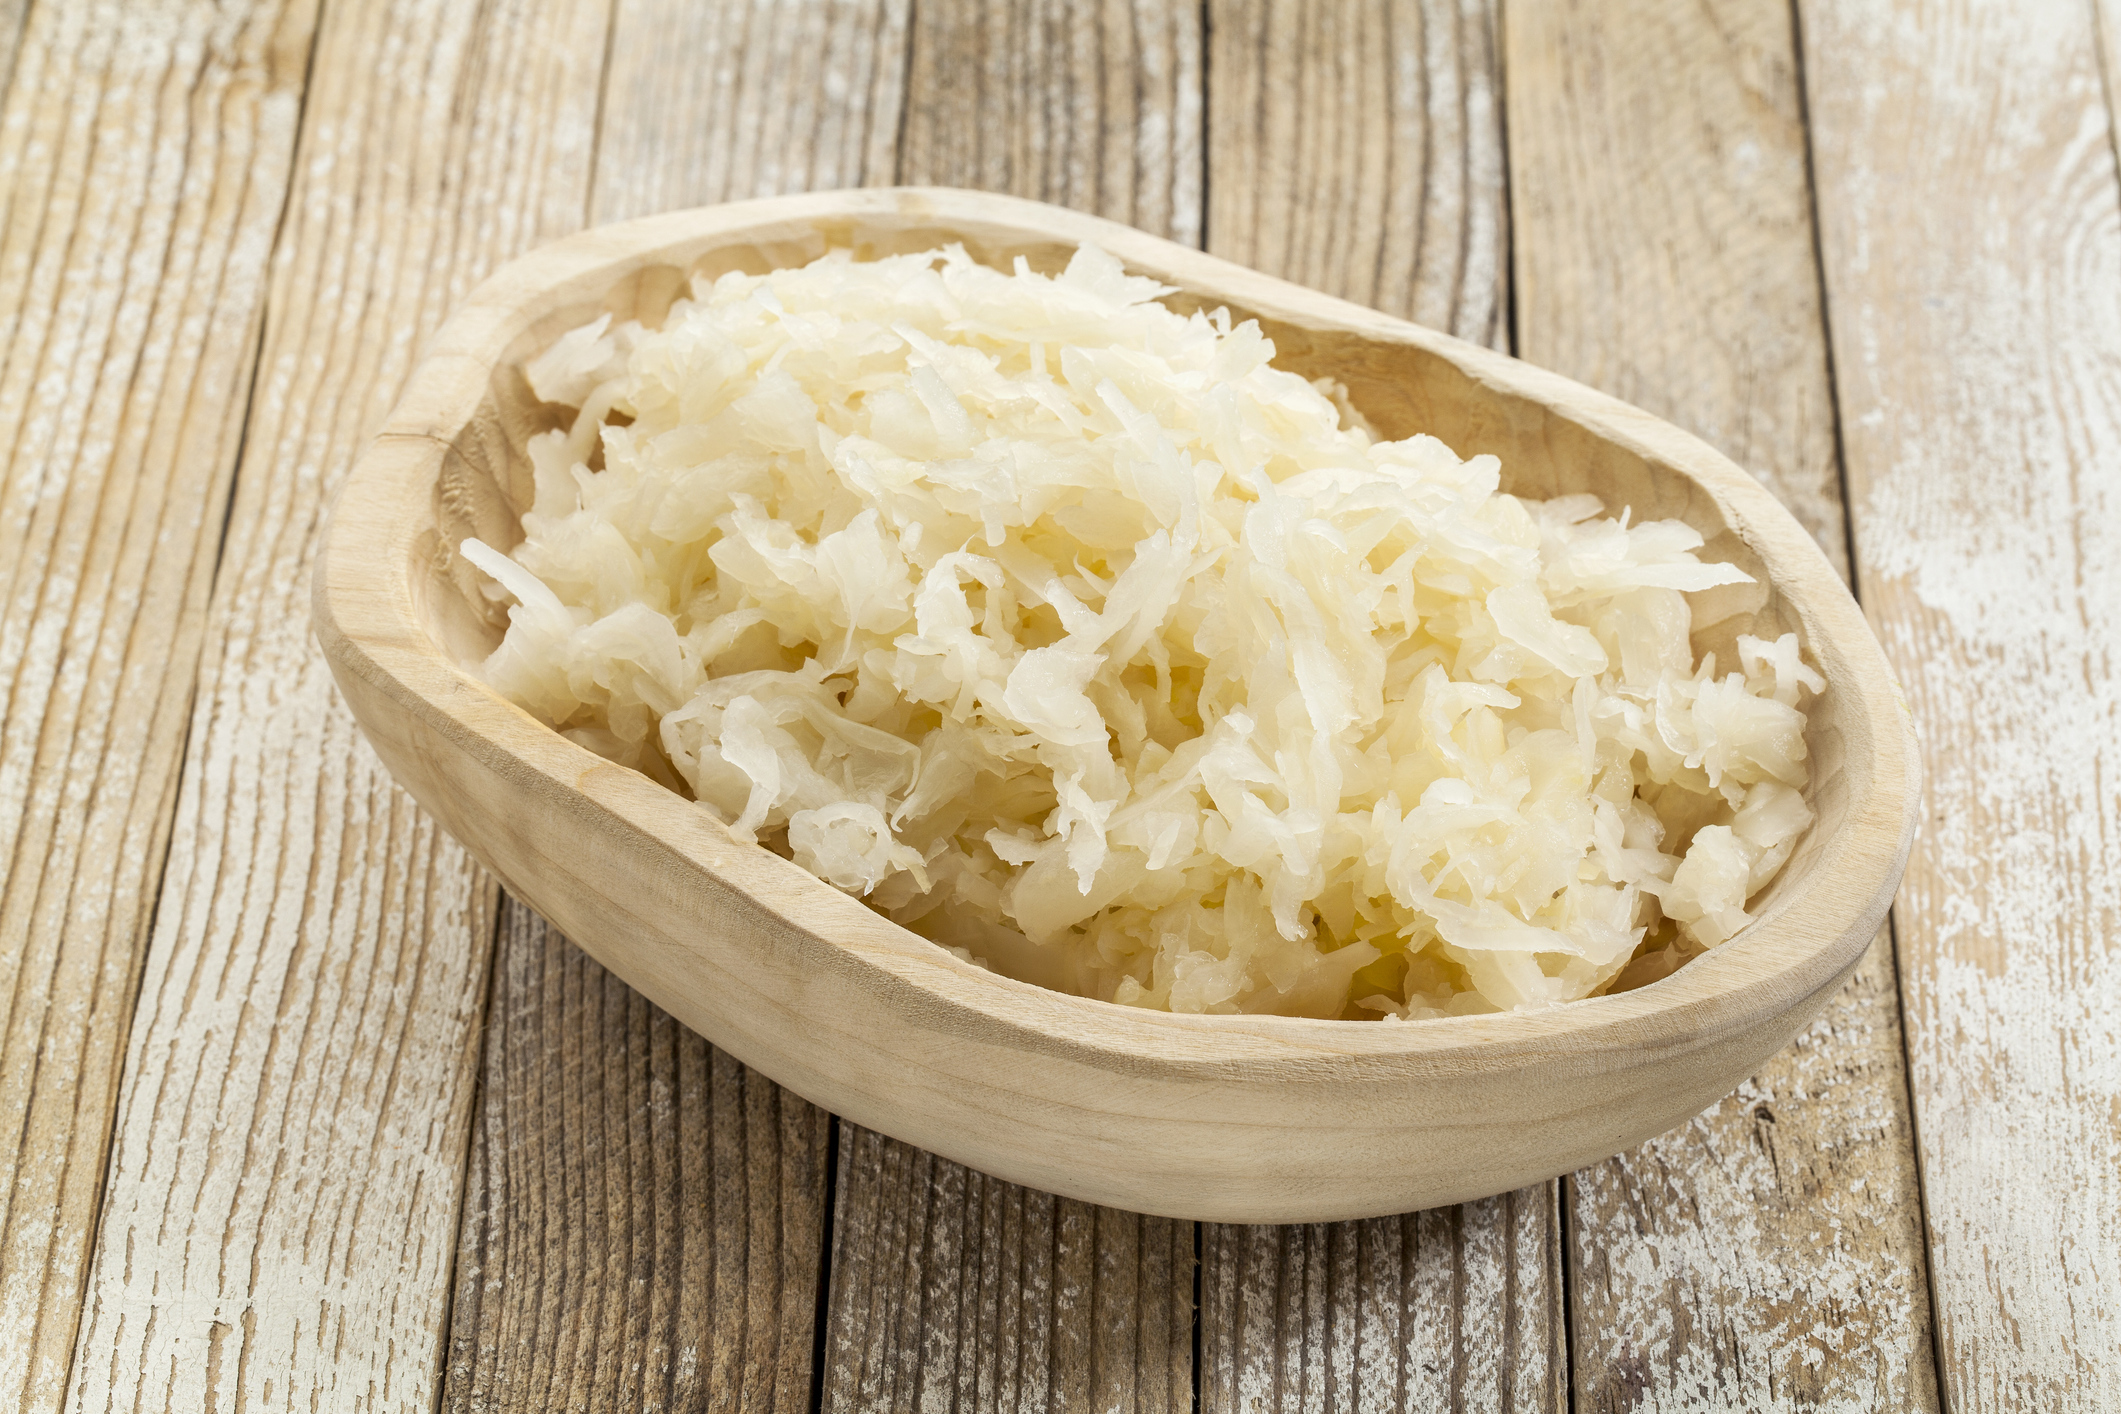 environmental nutrition: there’s something about sauerkraut